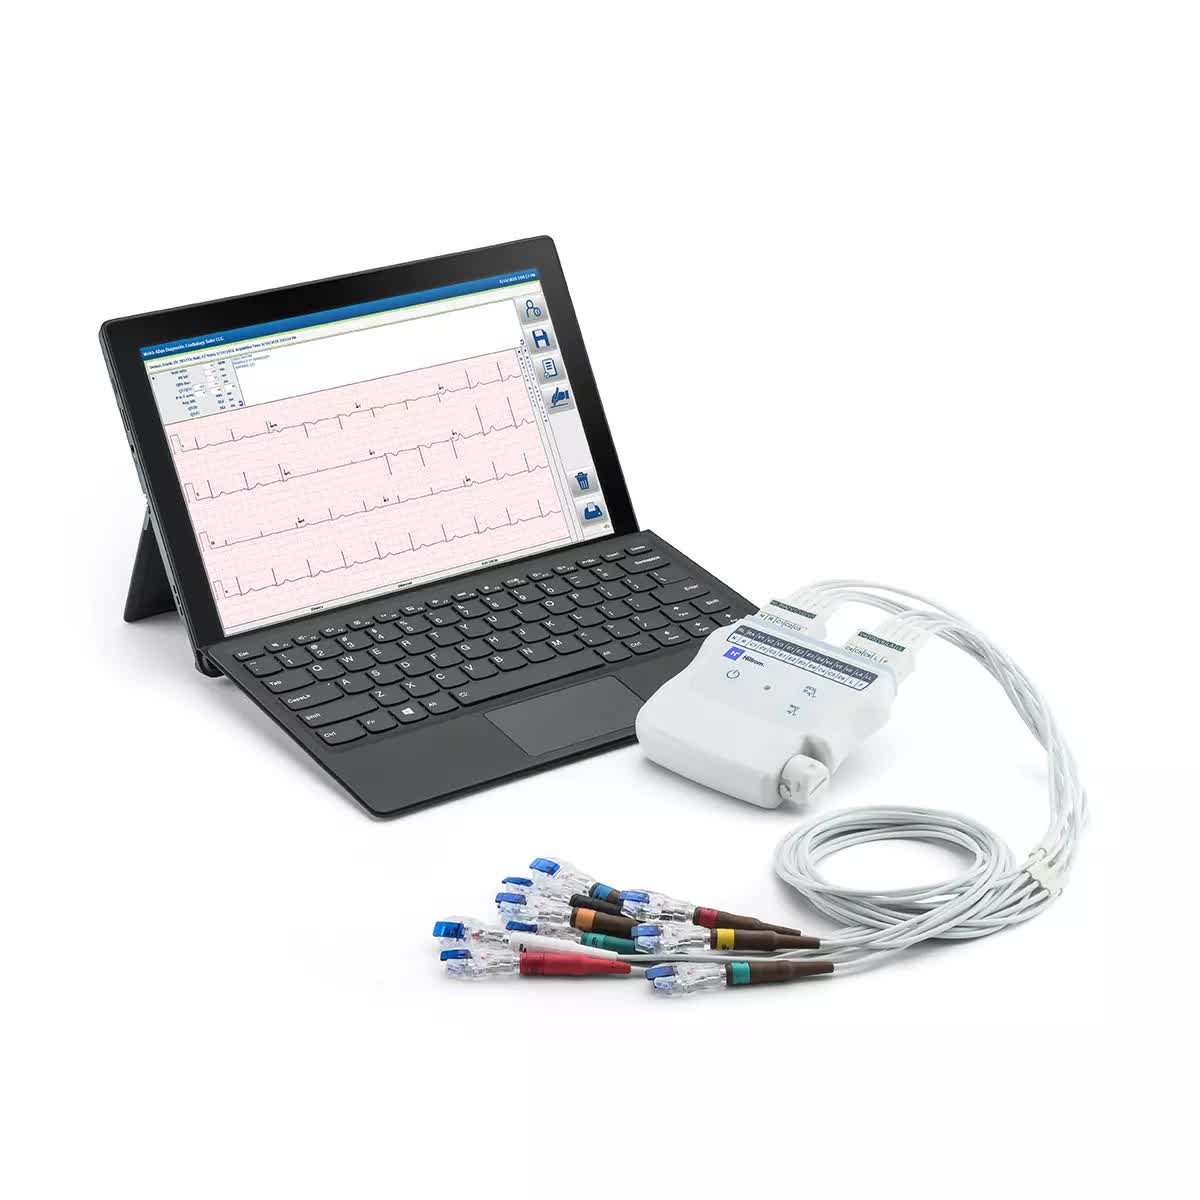 Welch Allyn Connex Diagnostic Cardiology Suite ECG Software with Cardio Wireless Acquisition Module